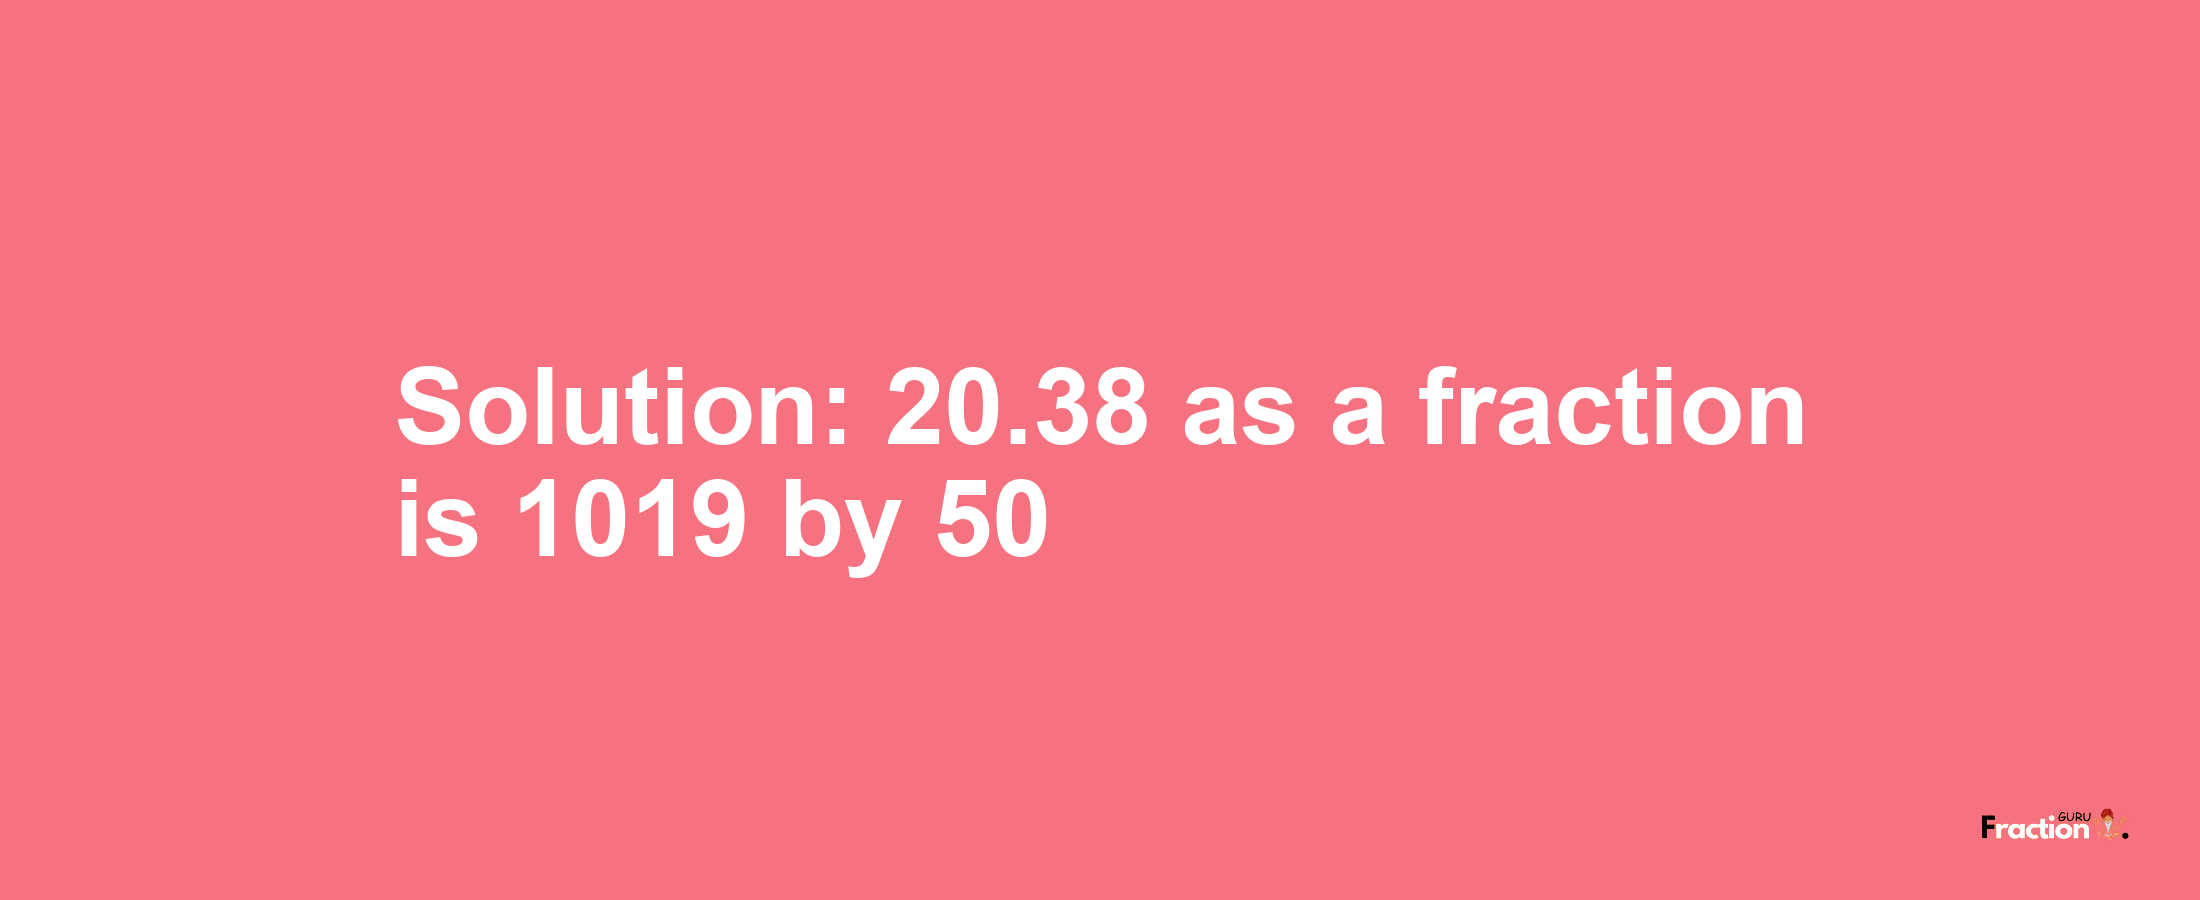 Solution:20.38 as a fraction is 1019/50